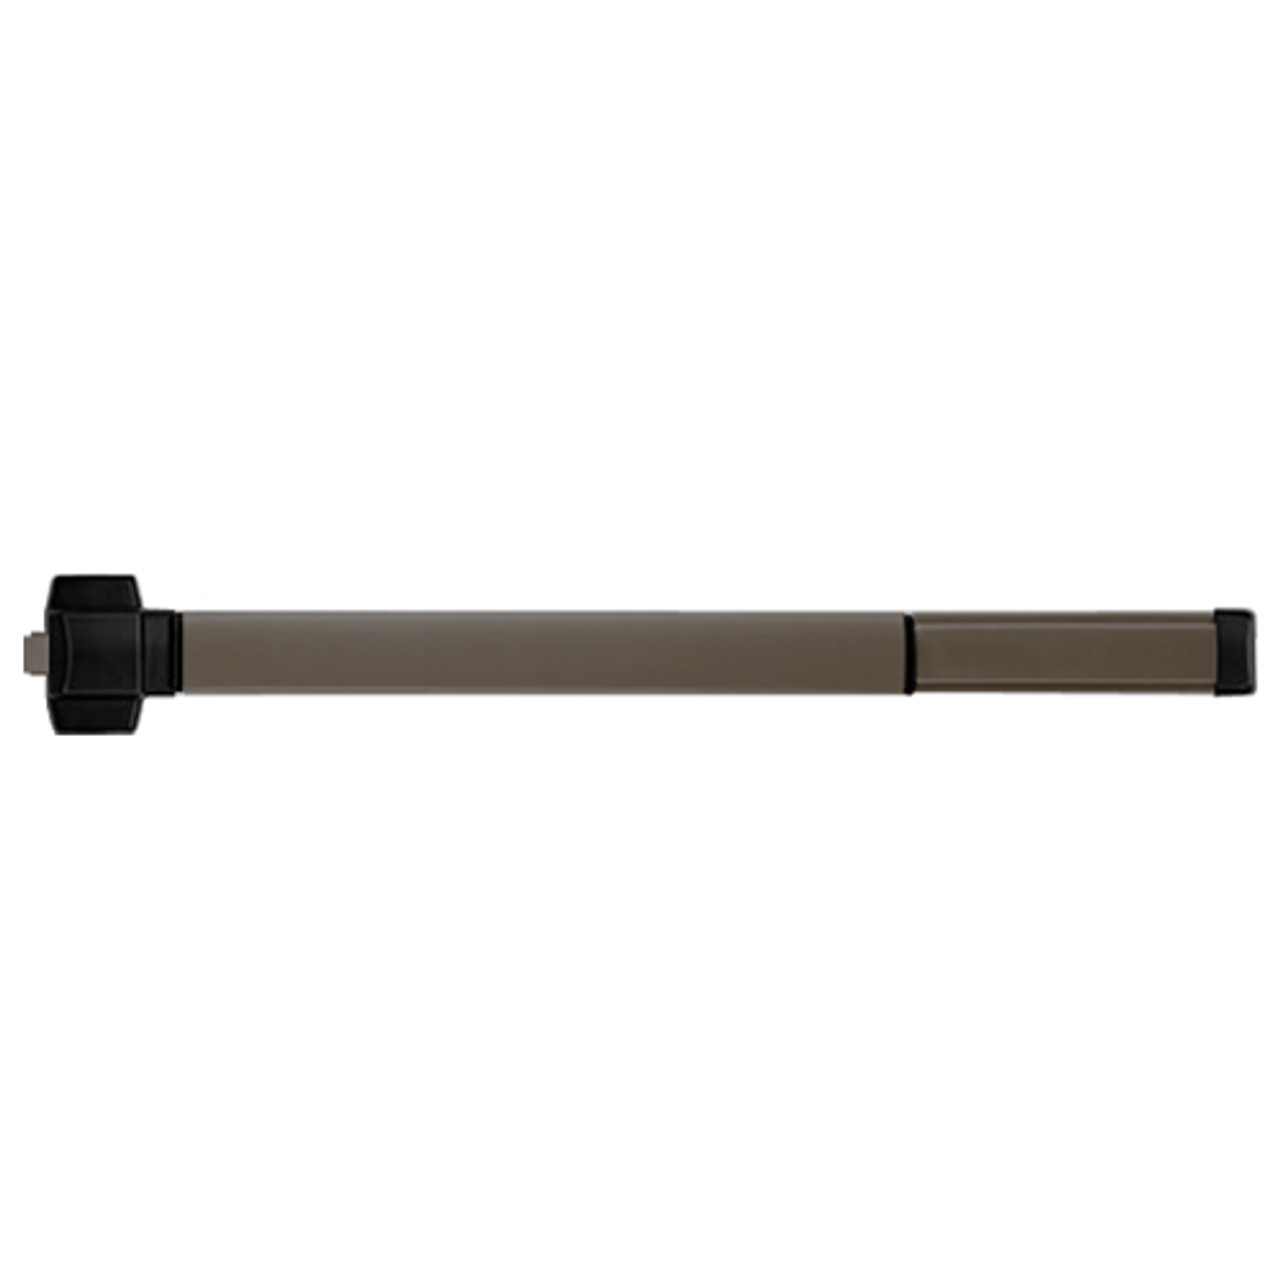 TS5102-695-48 PHI 5000 Series Non Fire Rated Reliant Rim Exit Device Prepped for Dummy Trim with Touchbar Monitoring Switch in Dark Bronze Powder Coat Finish